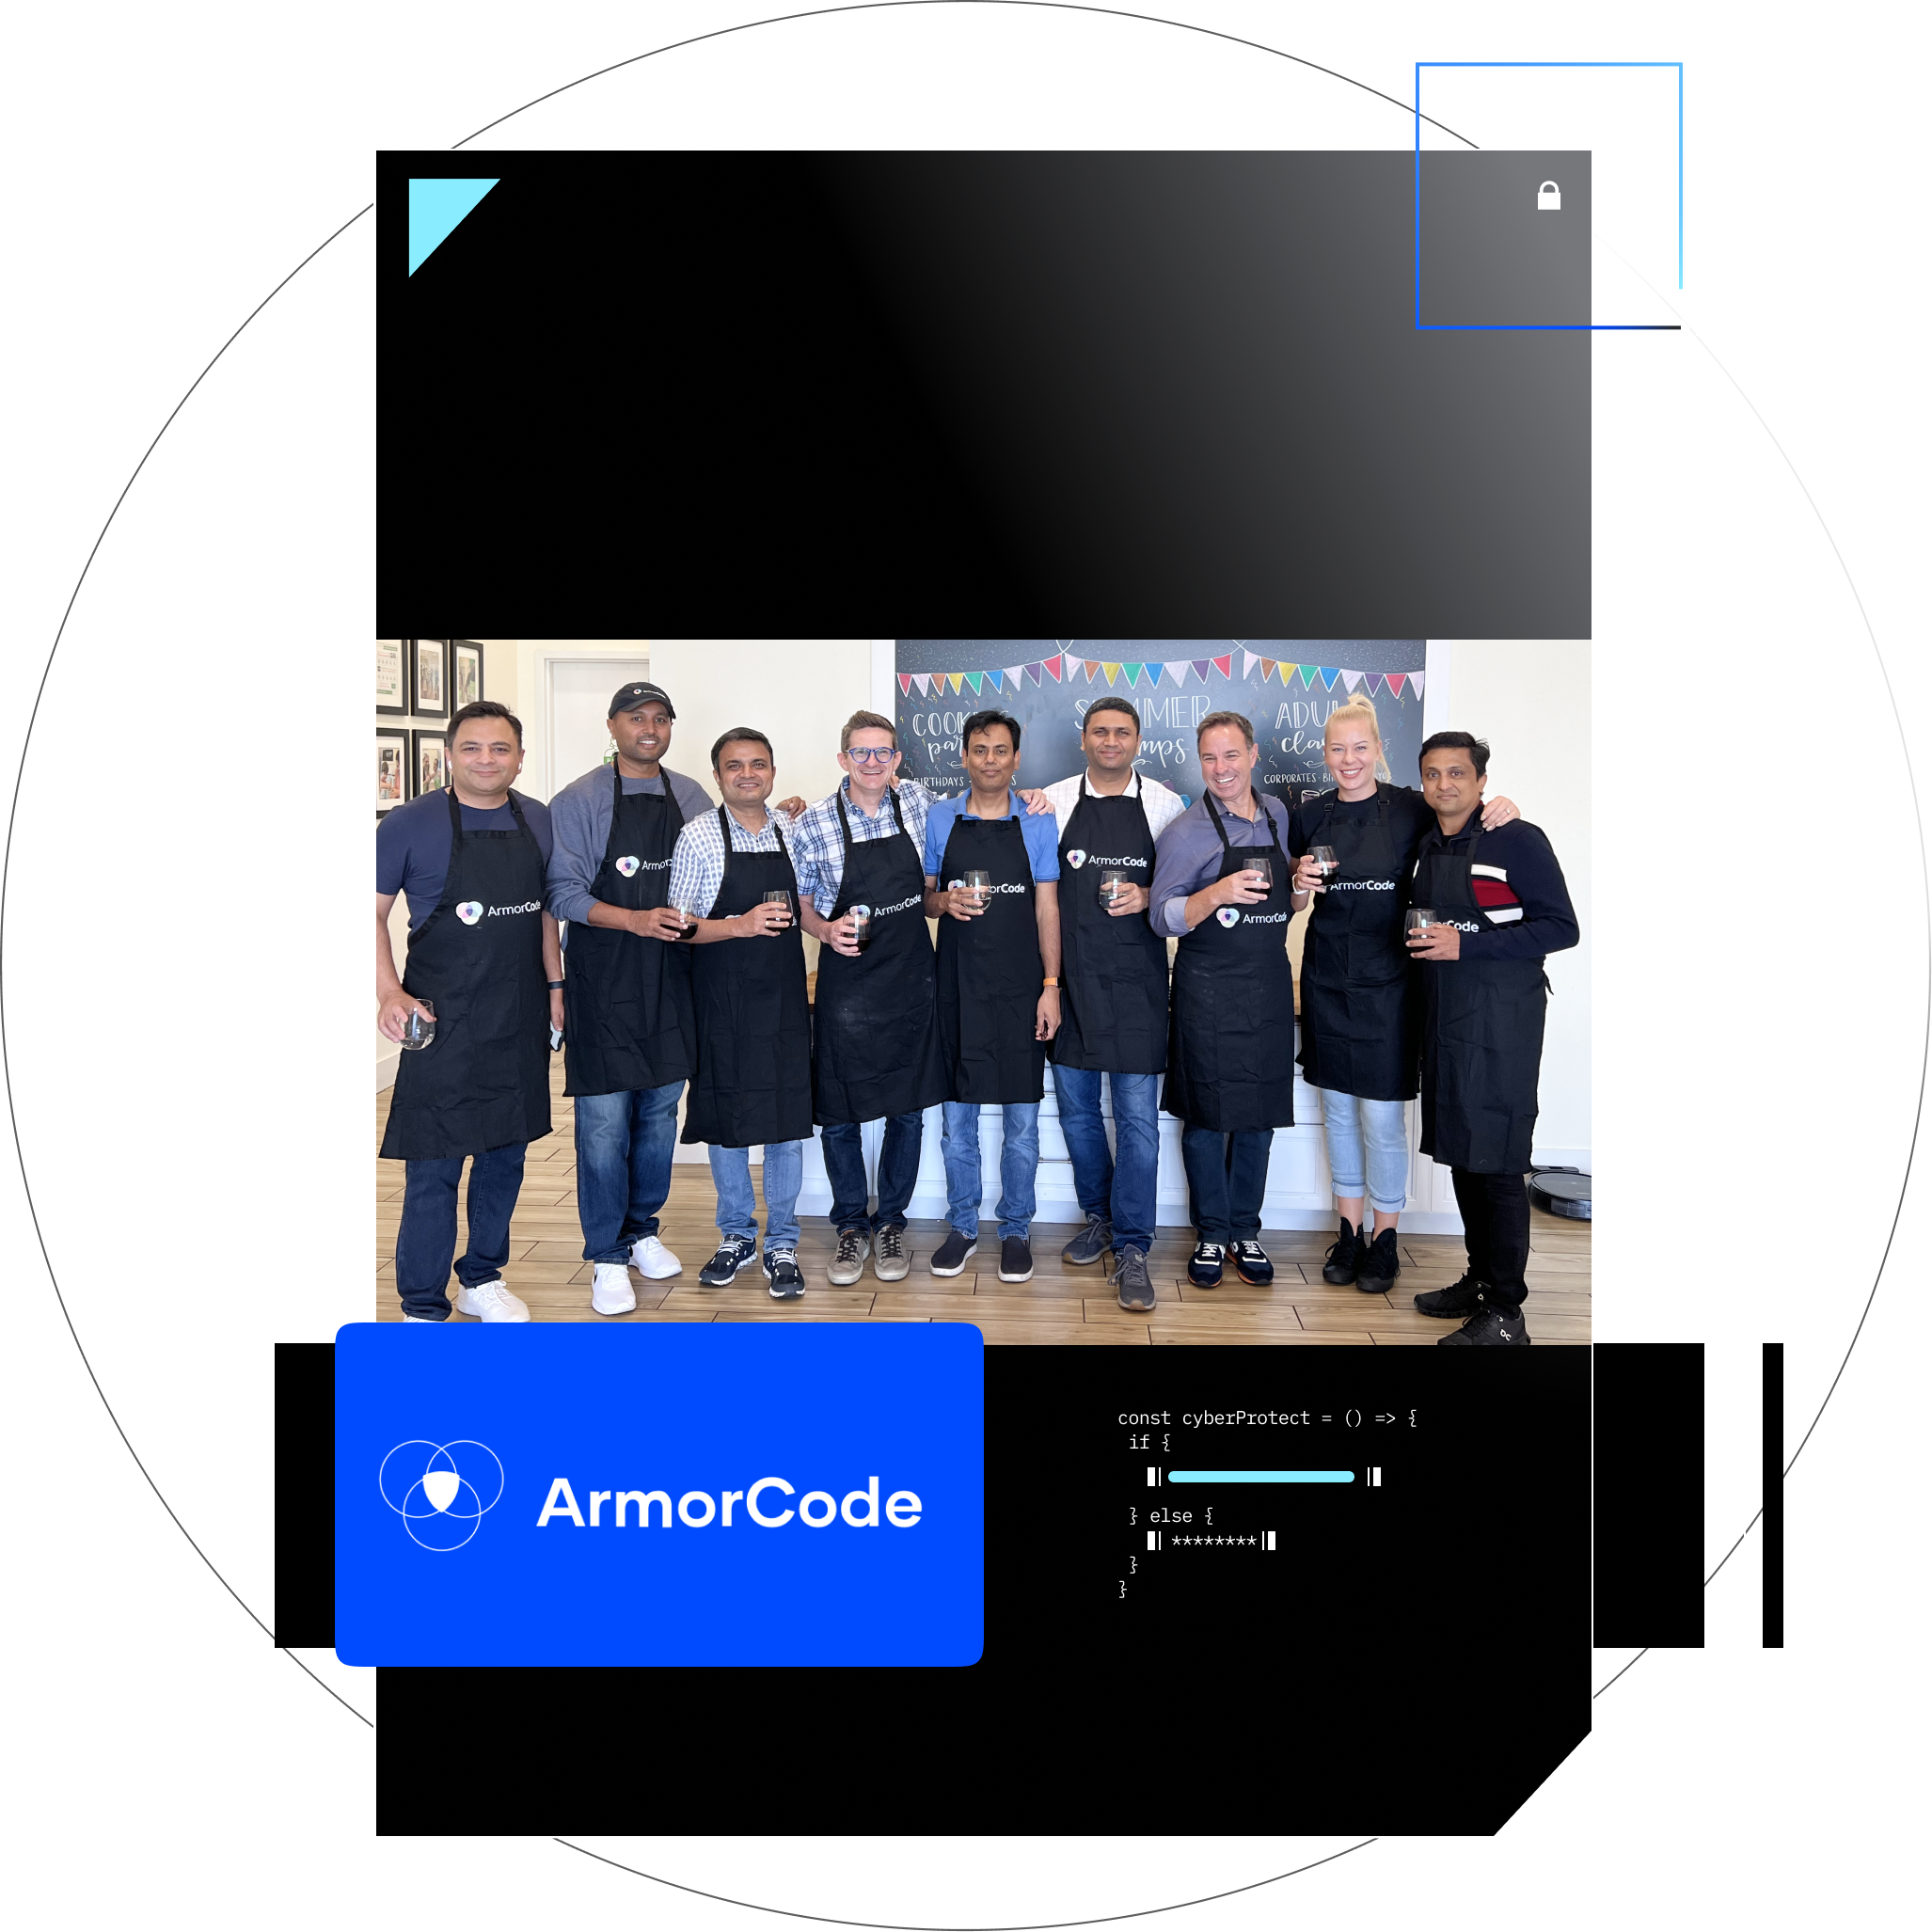 Helping companies like ArmorCode lead AppSecOps